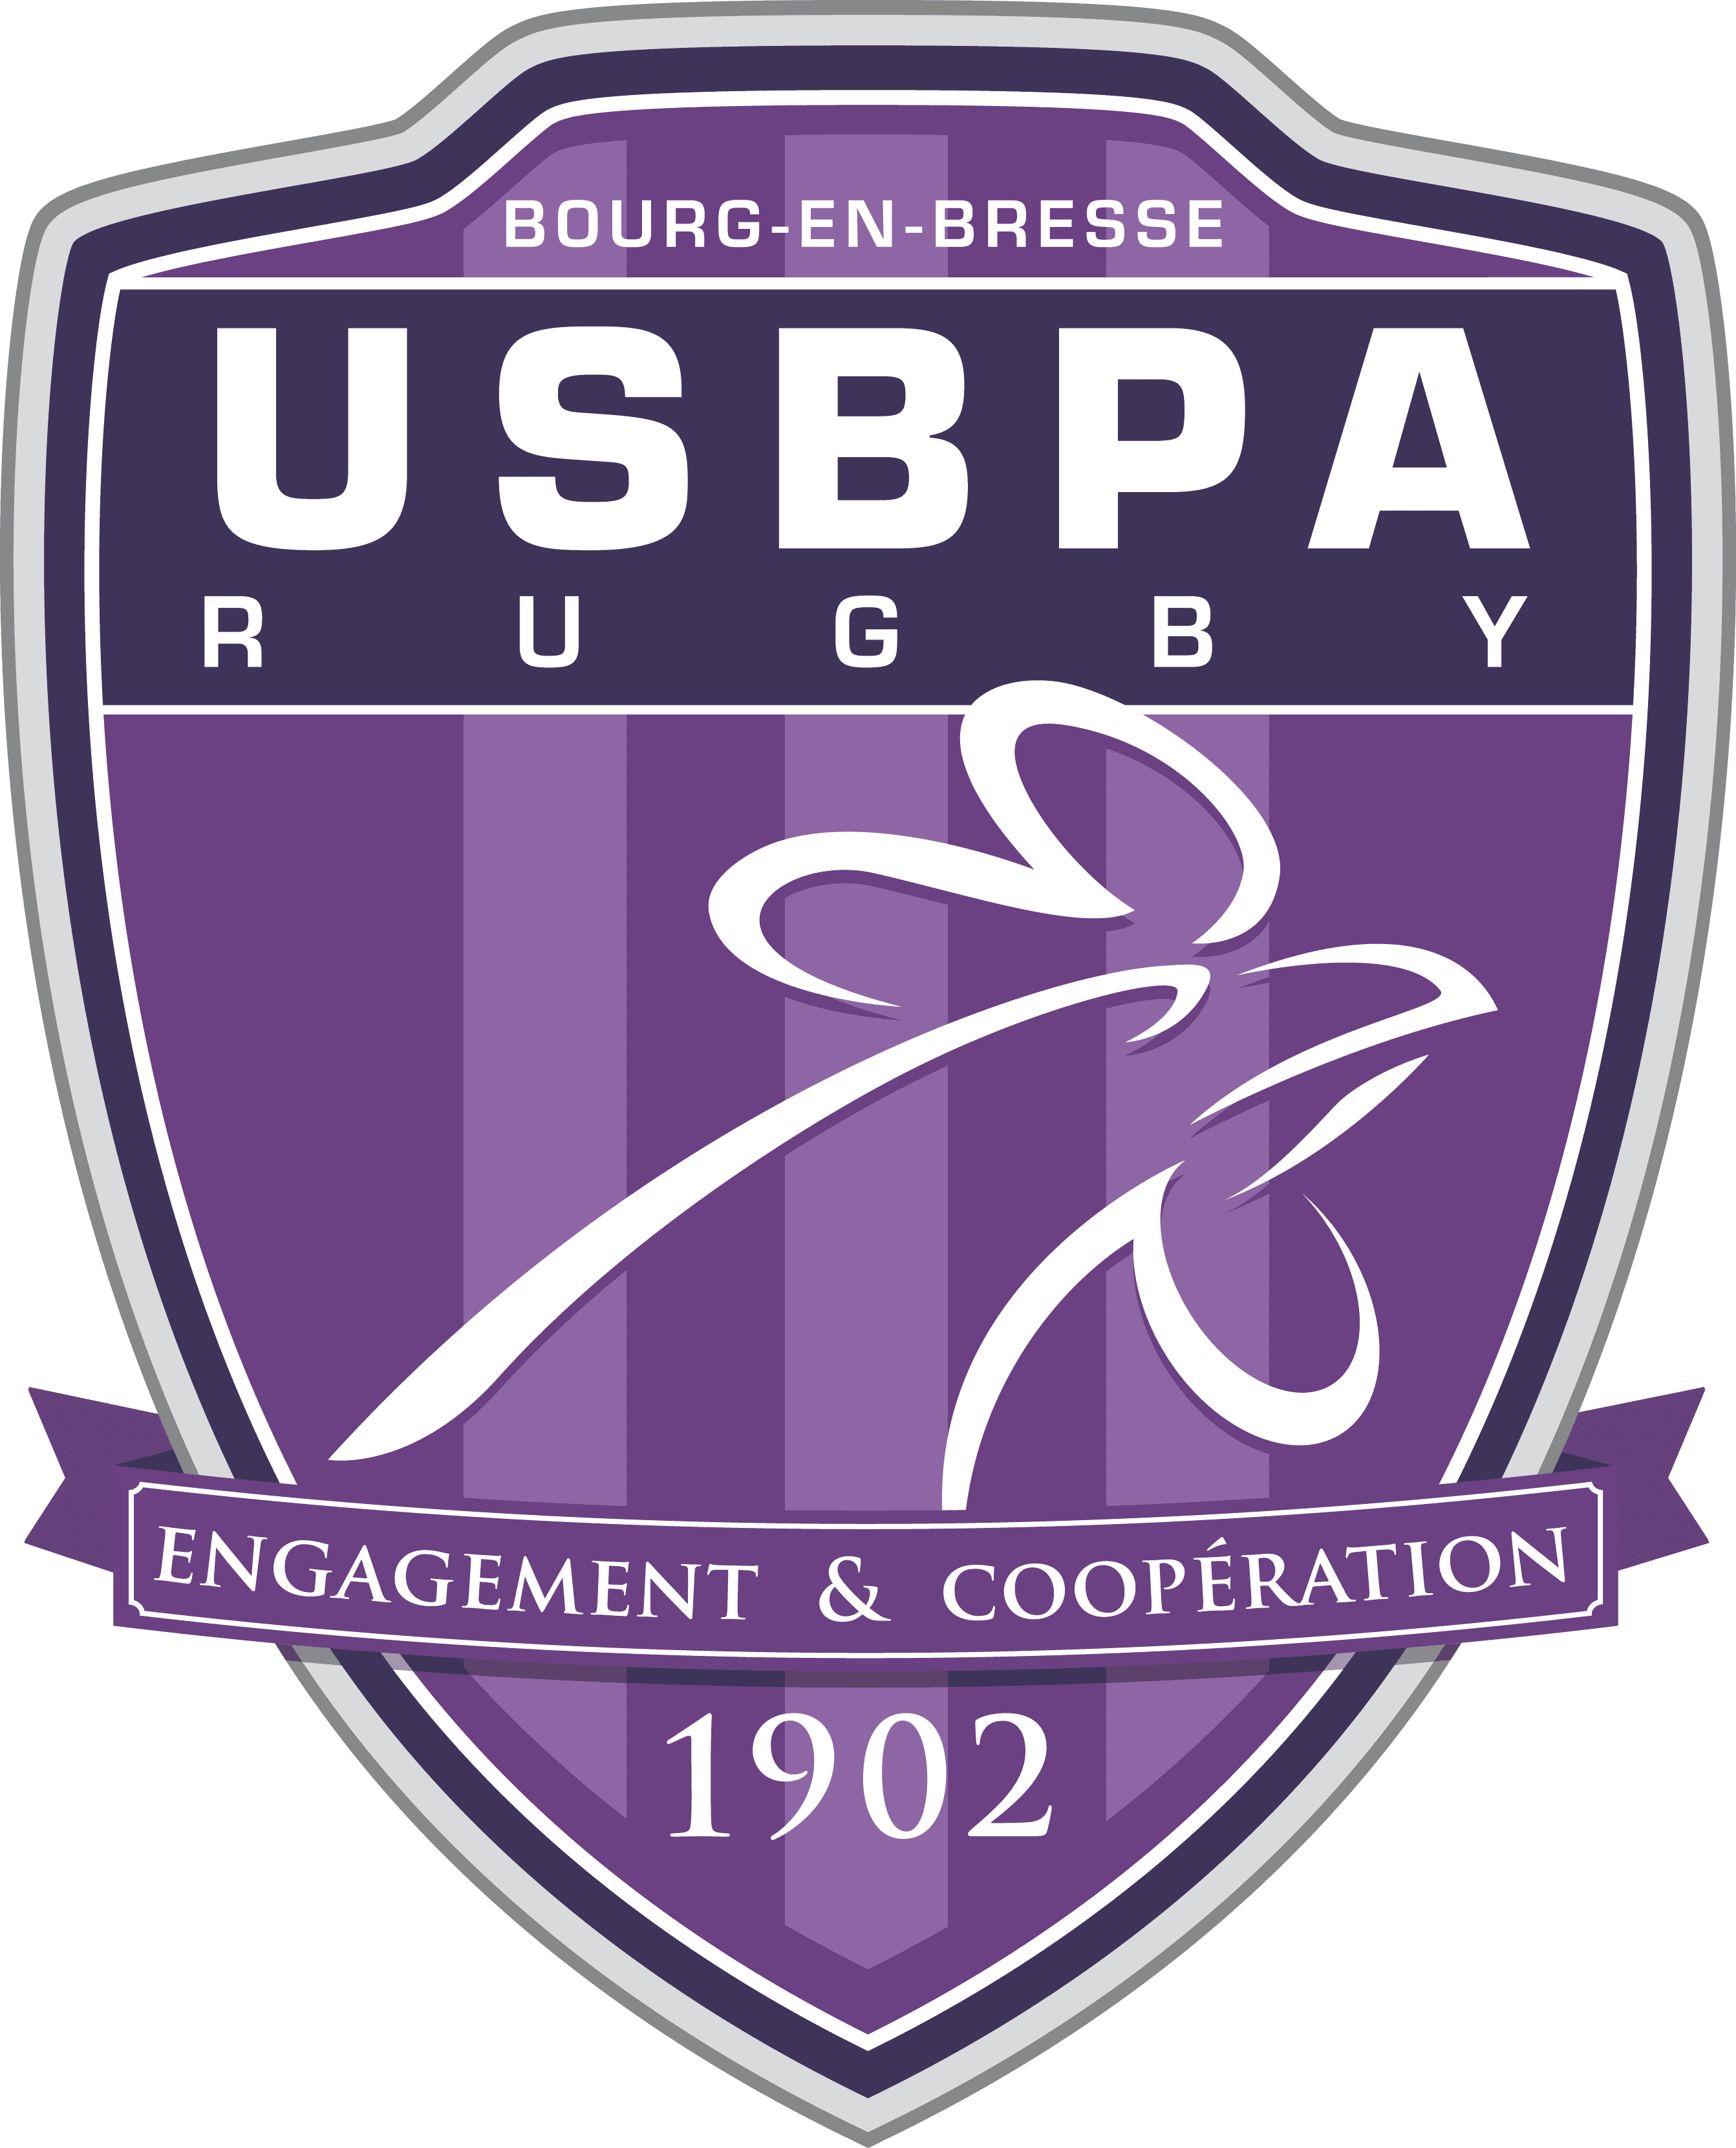 USBPA RUGBY